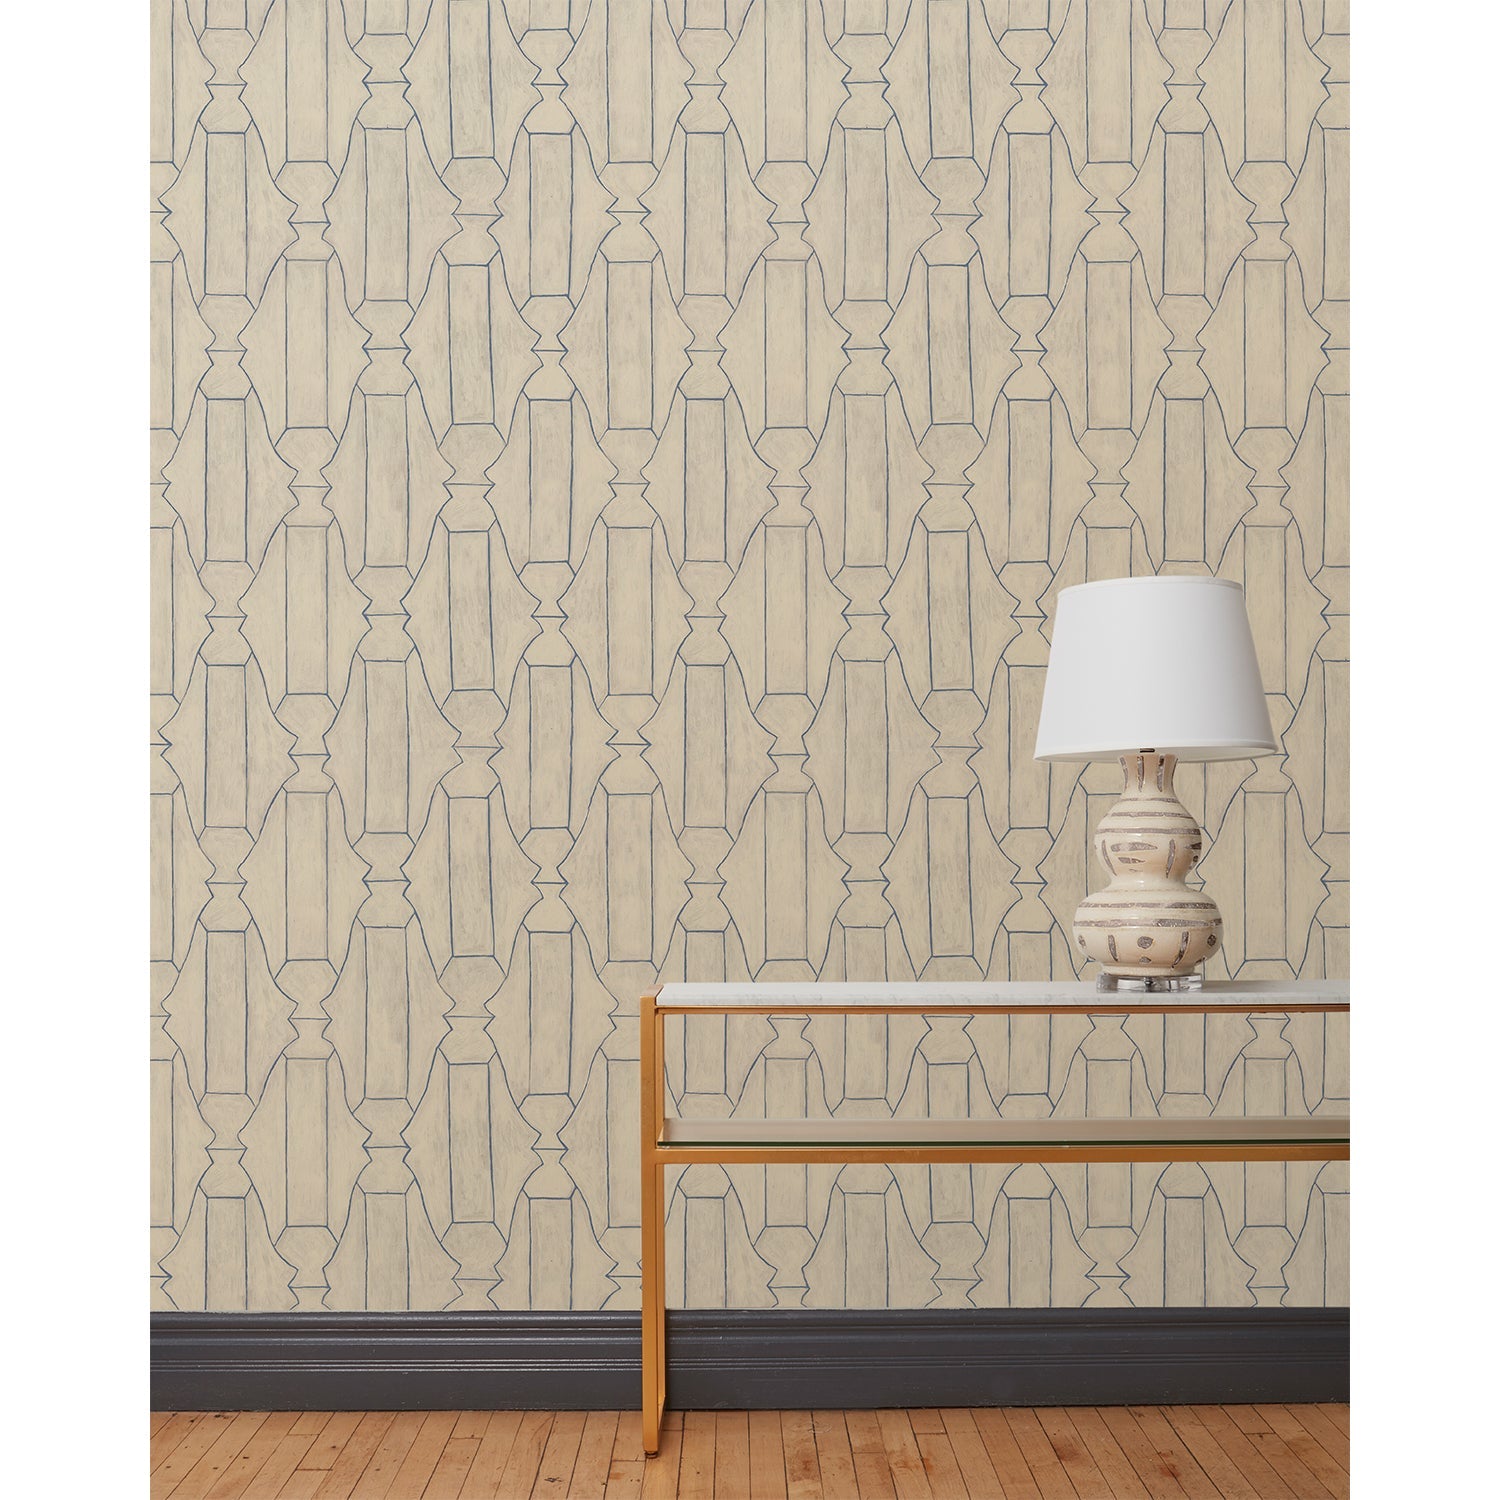 End table and white lamp in front of a wall papered in a repeating curvolinear print in navy on a painted tan field.